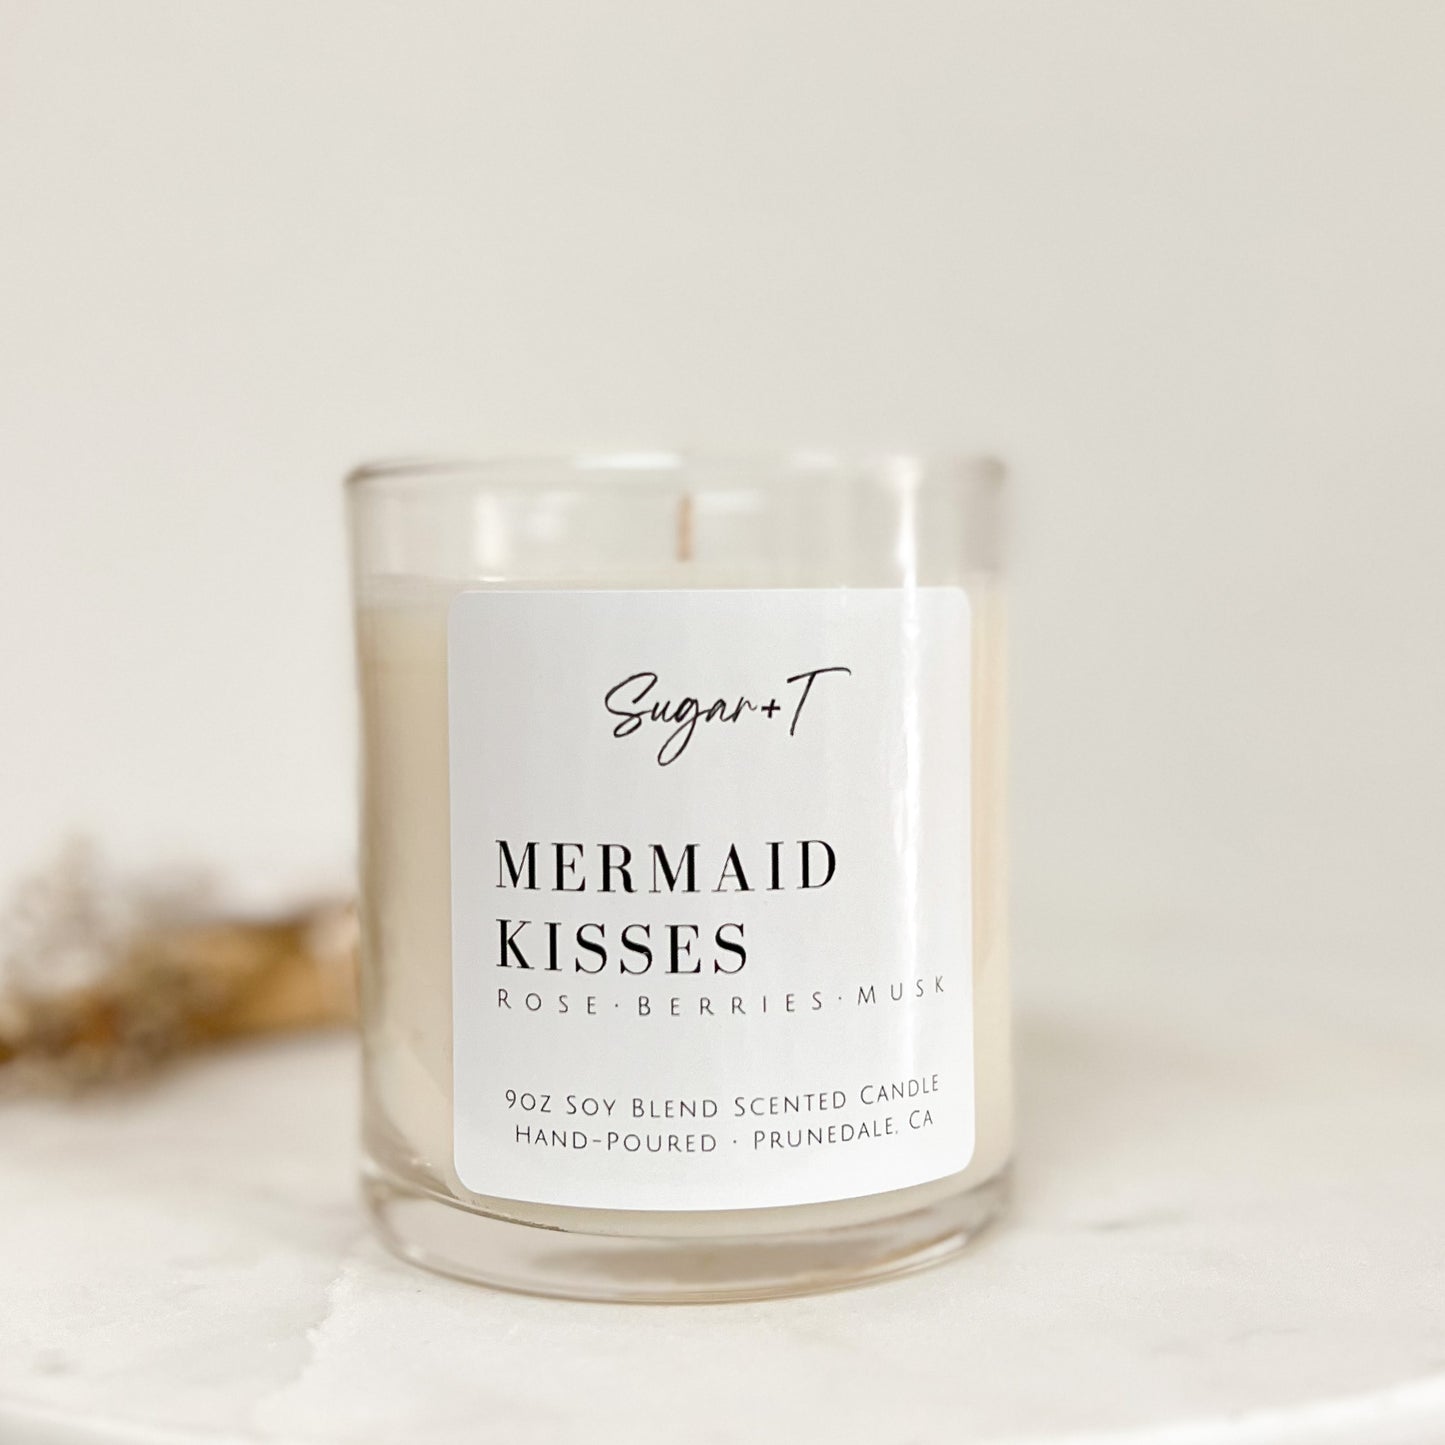 Mermaid Kisses Scented Candle